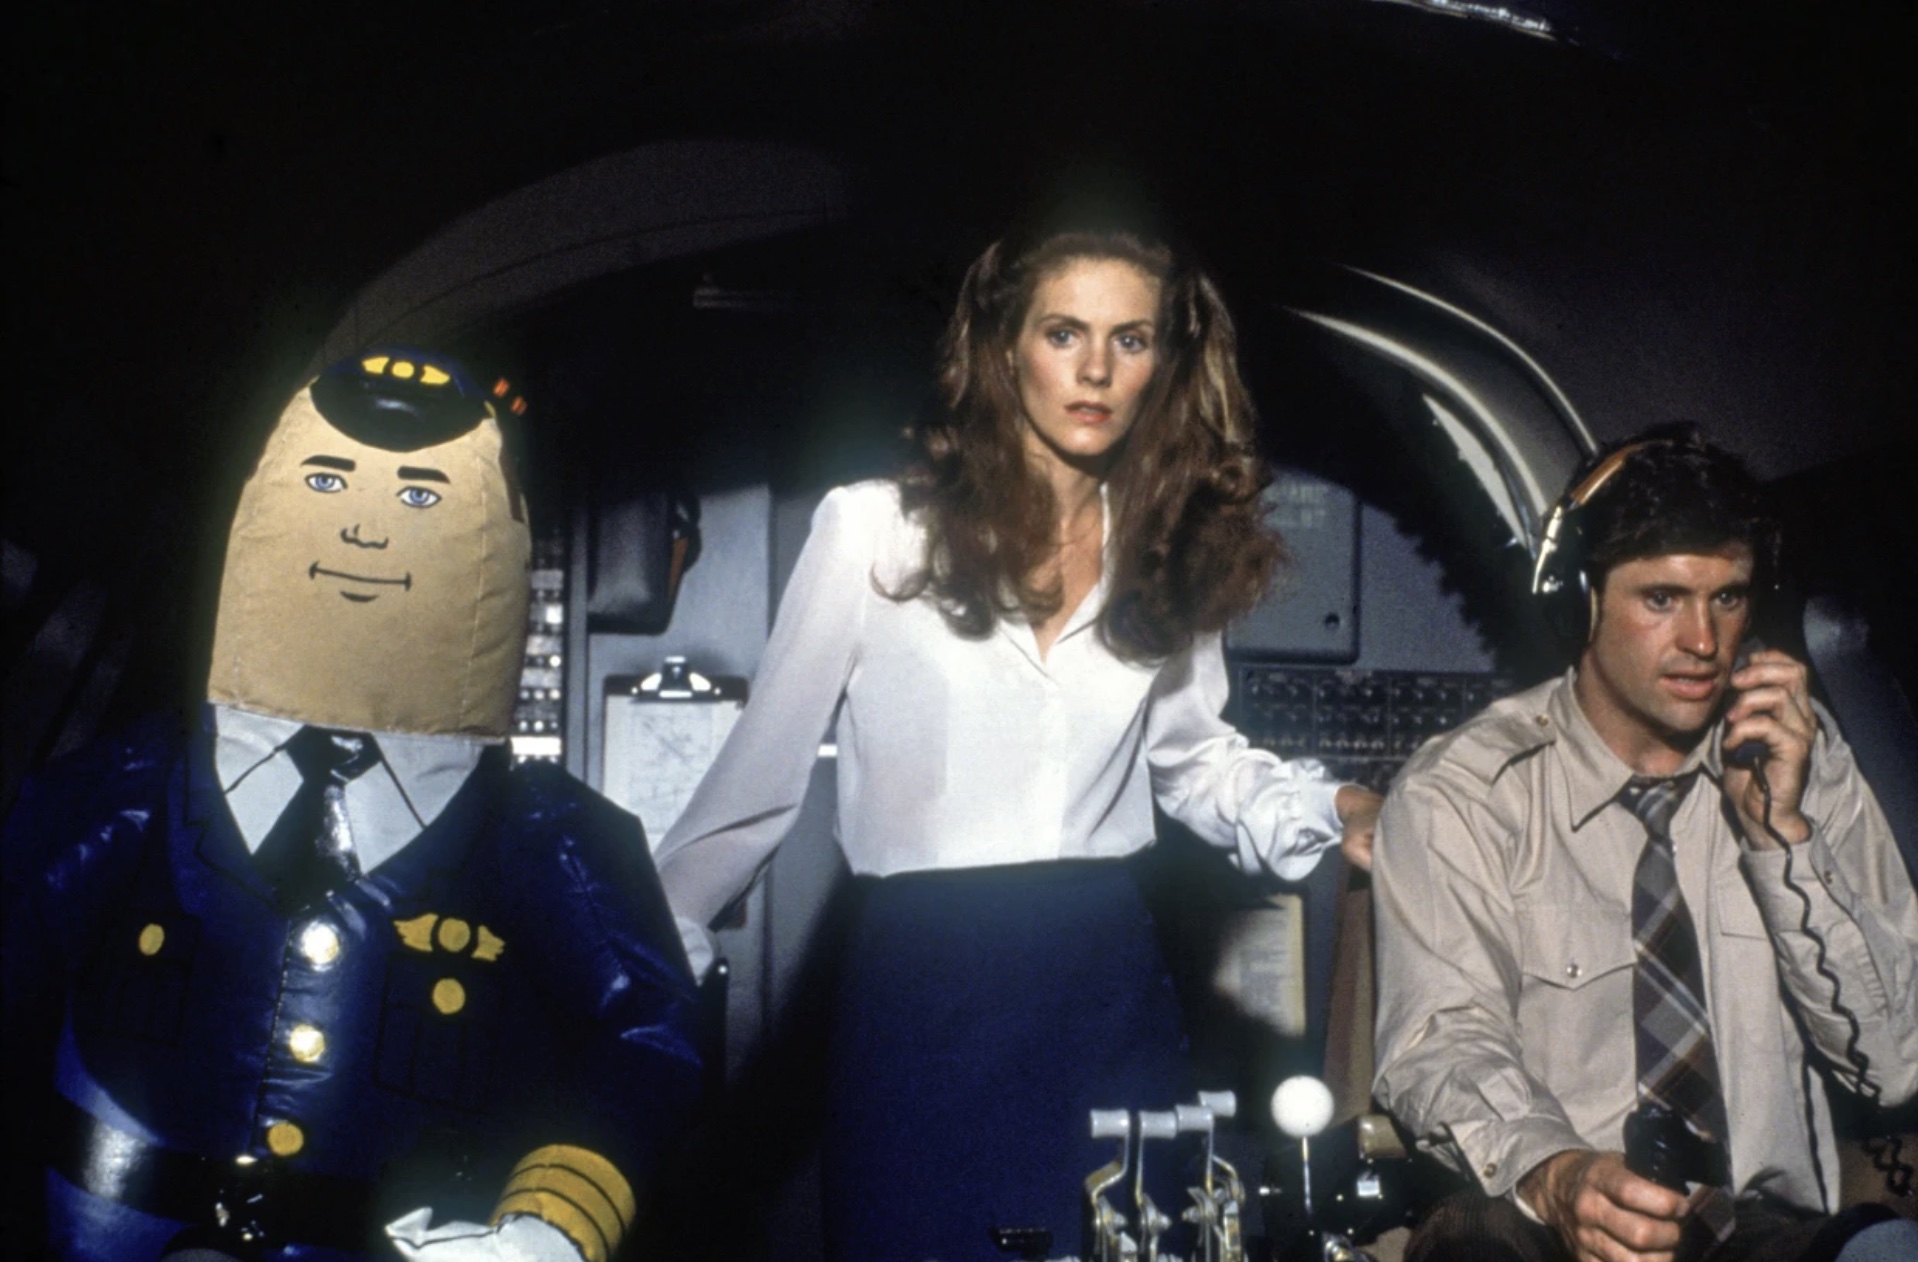 still from the movie "Airplane"